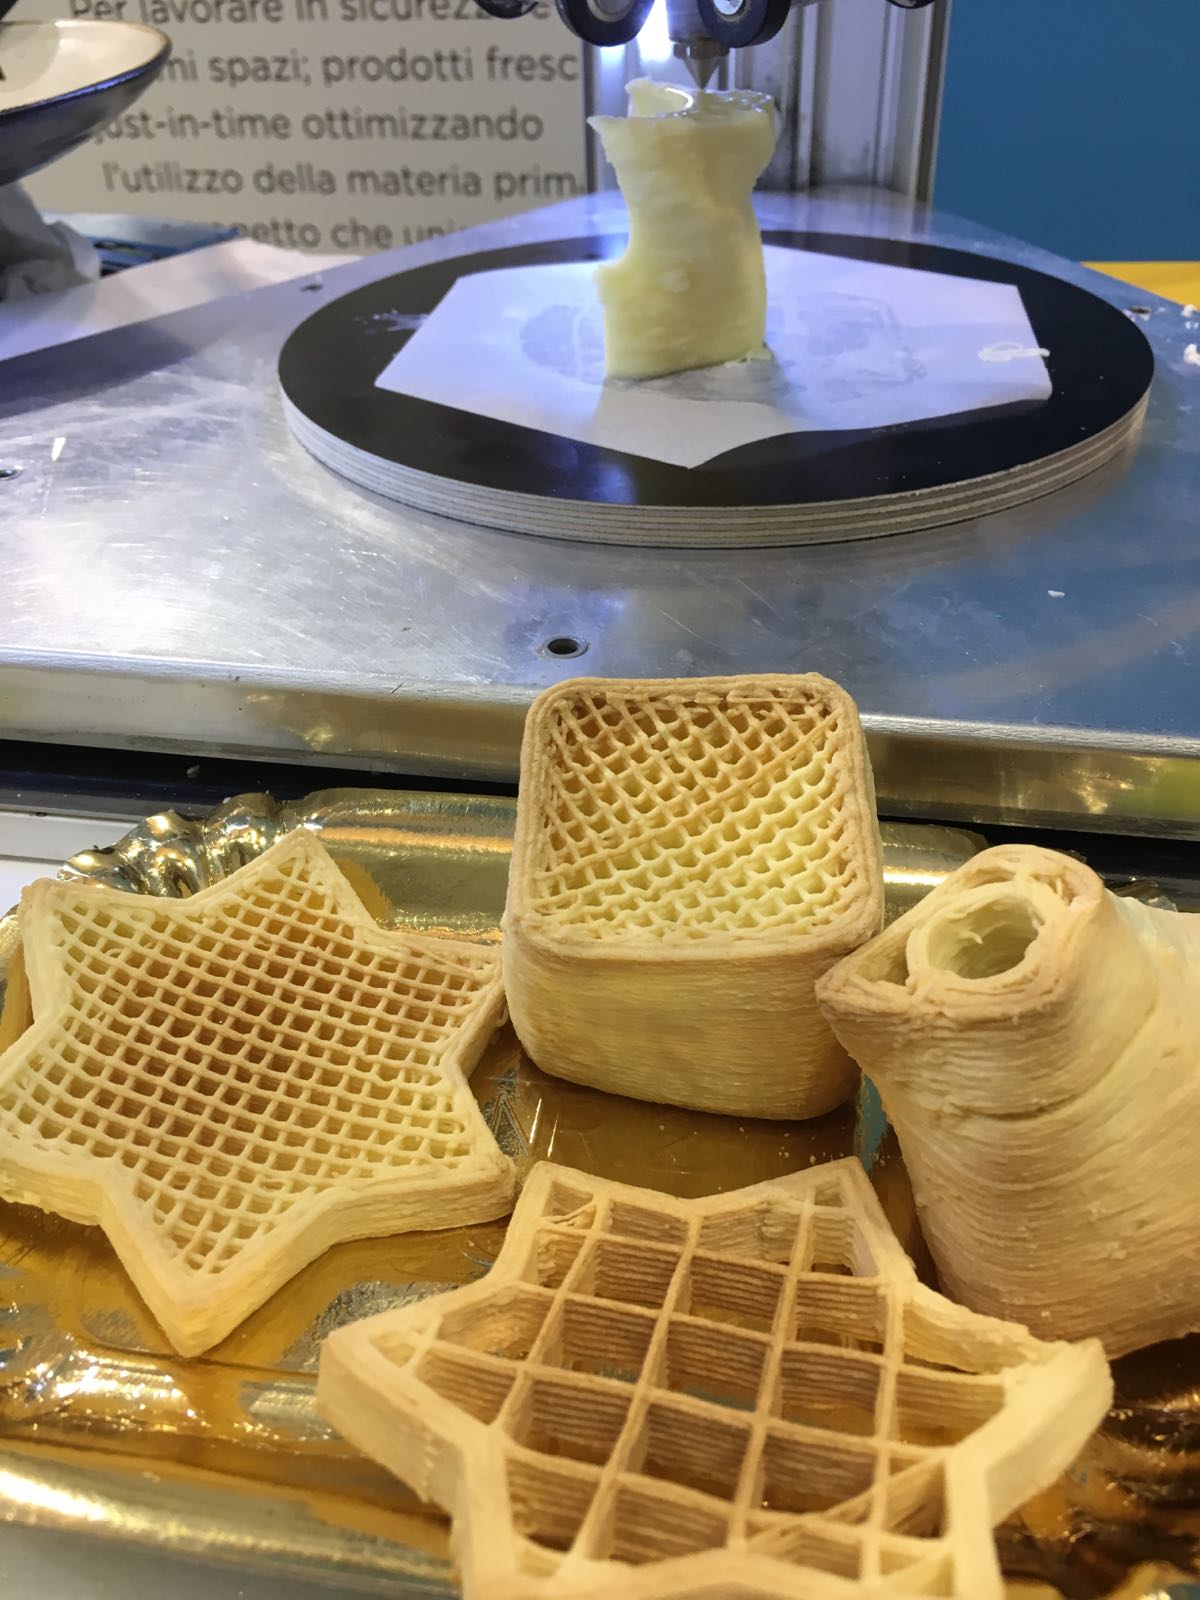 WASP Cooperates With Chef Francesco Favorito to 3D Print Gluten Free Food